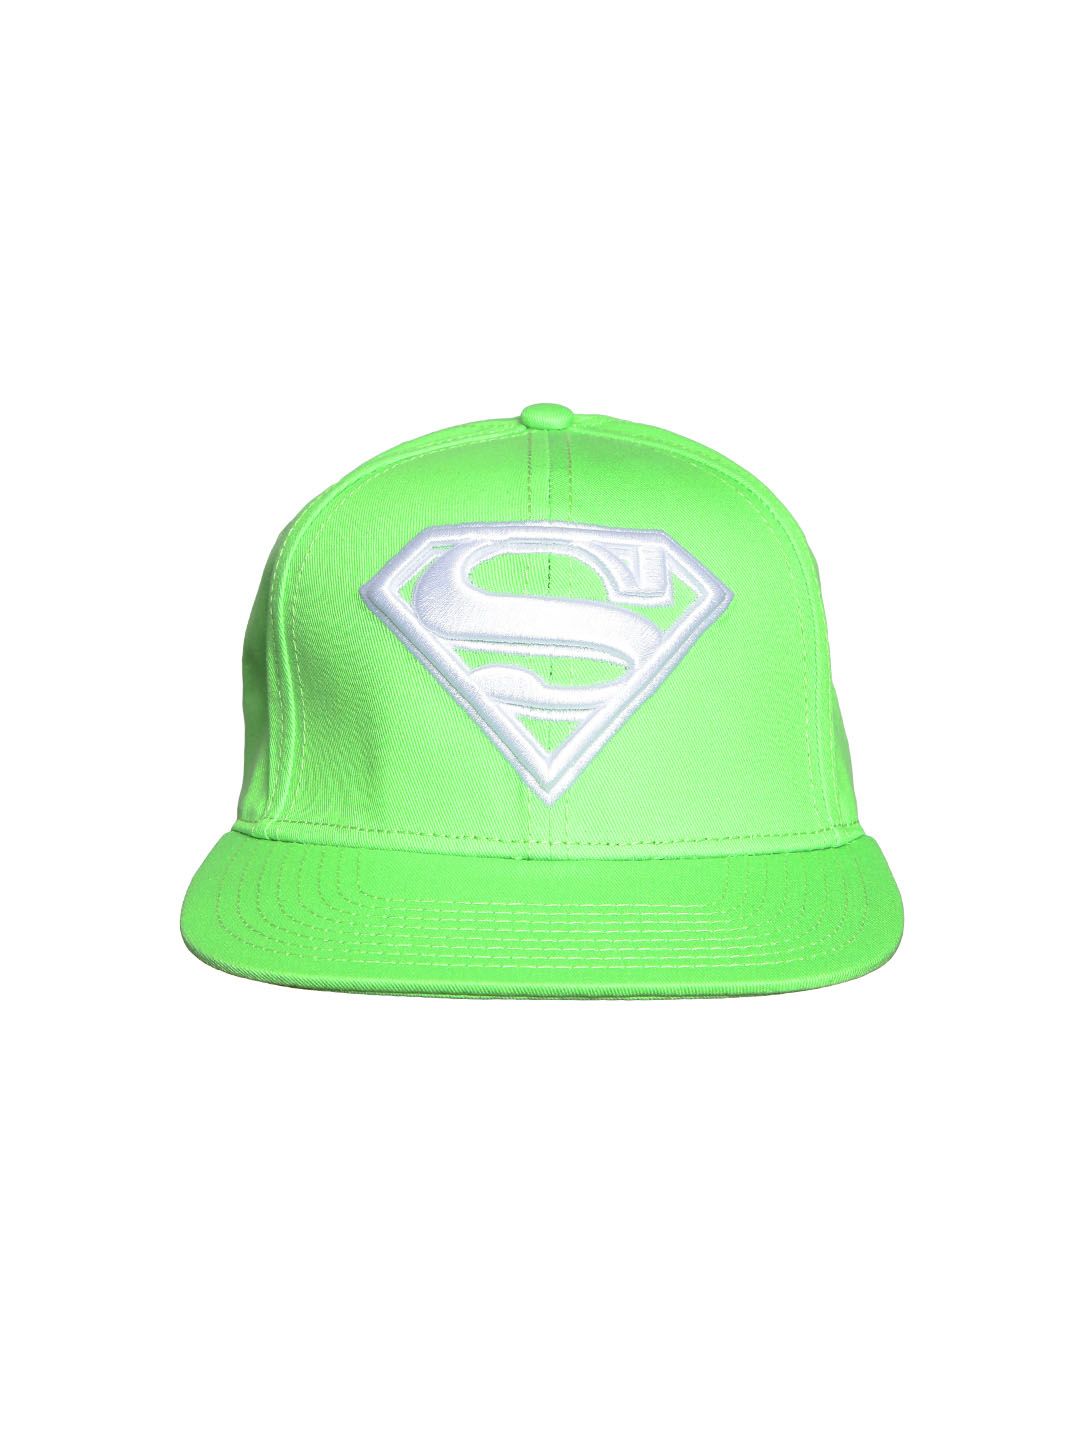 Free Authority Unisex Green & White Superman Embroidered Snapback Cap Price in India